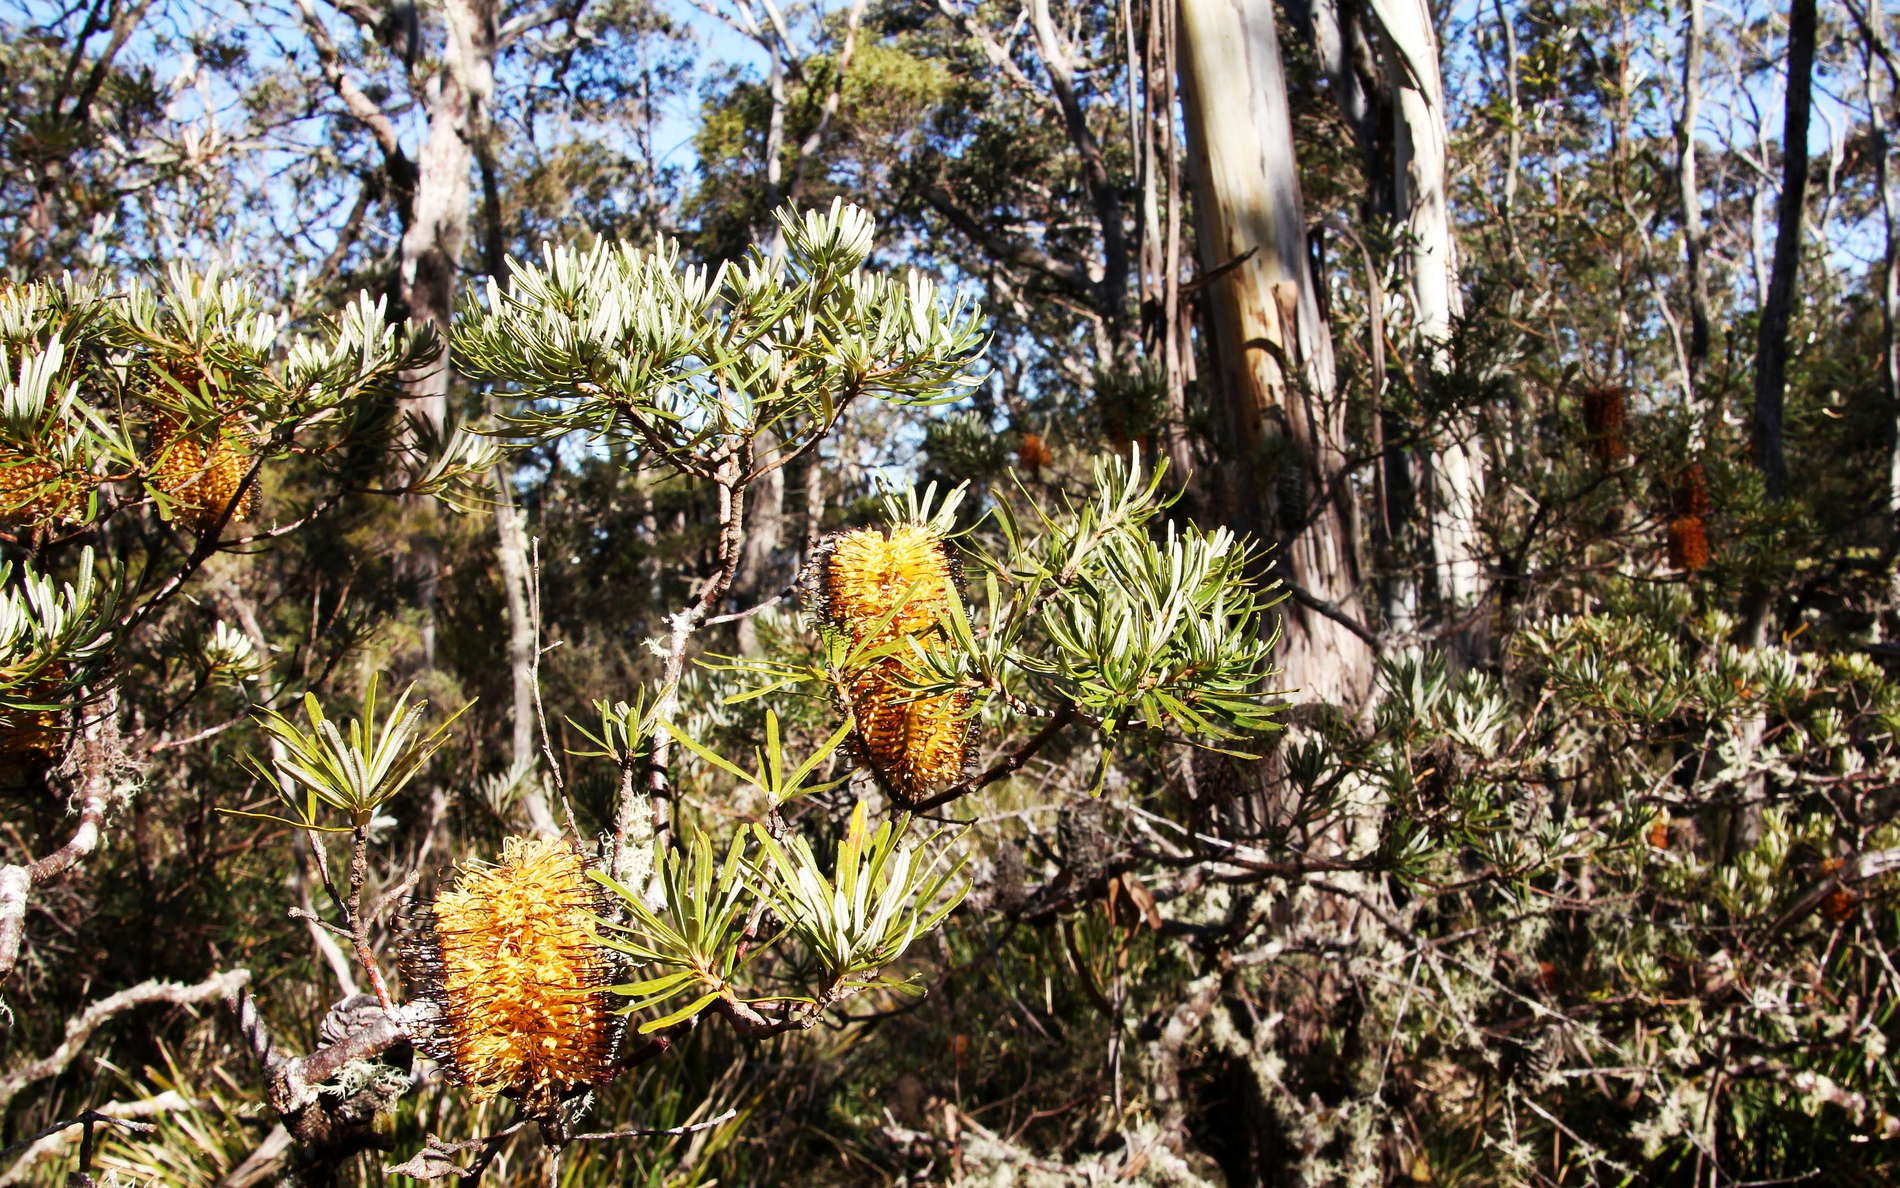 New England NP  |  Banksia spinulosa